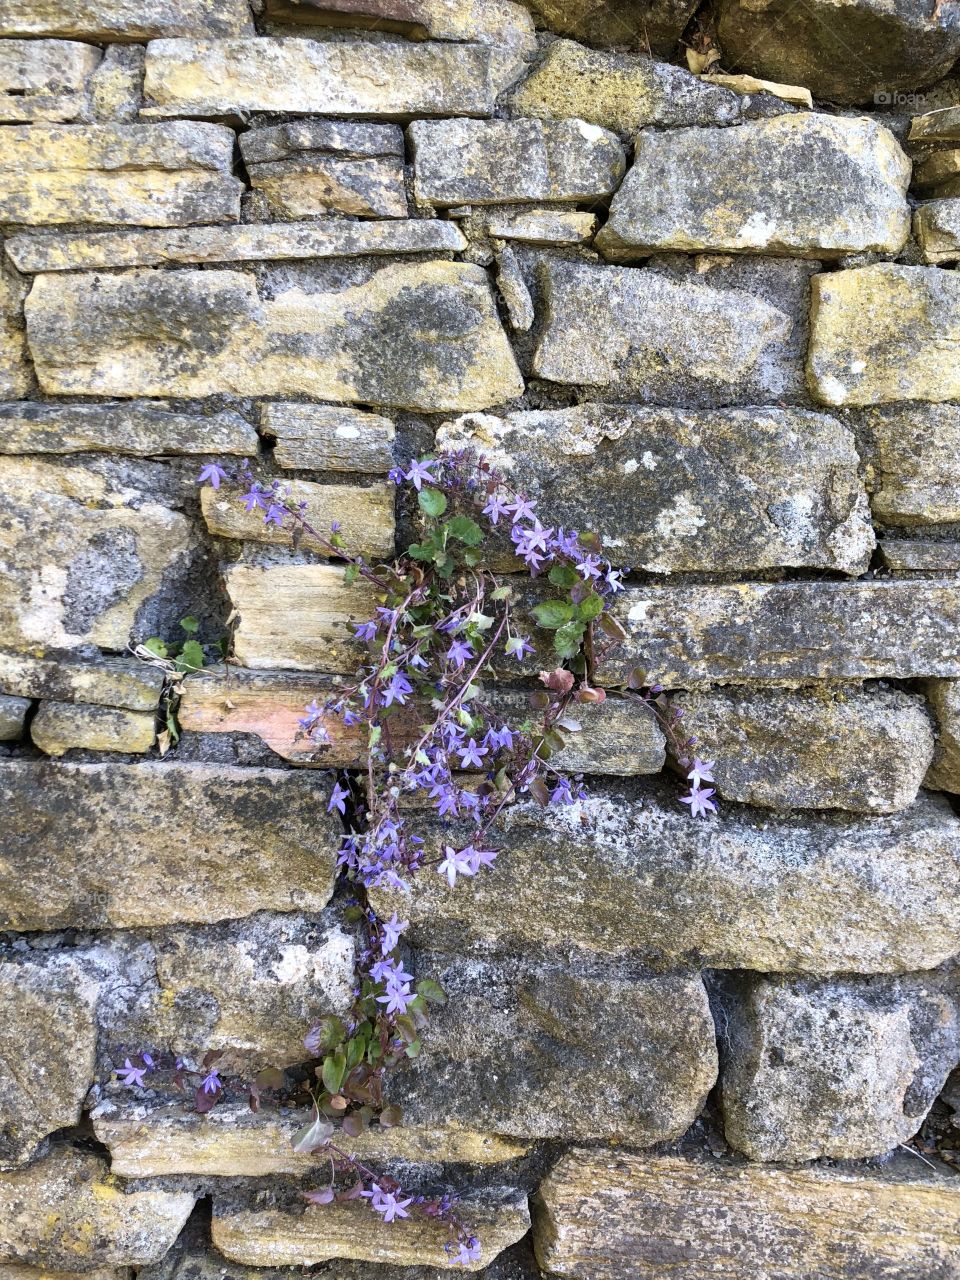 Flowers in a dry stone wall